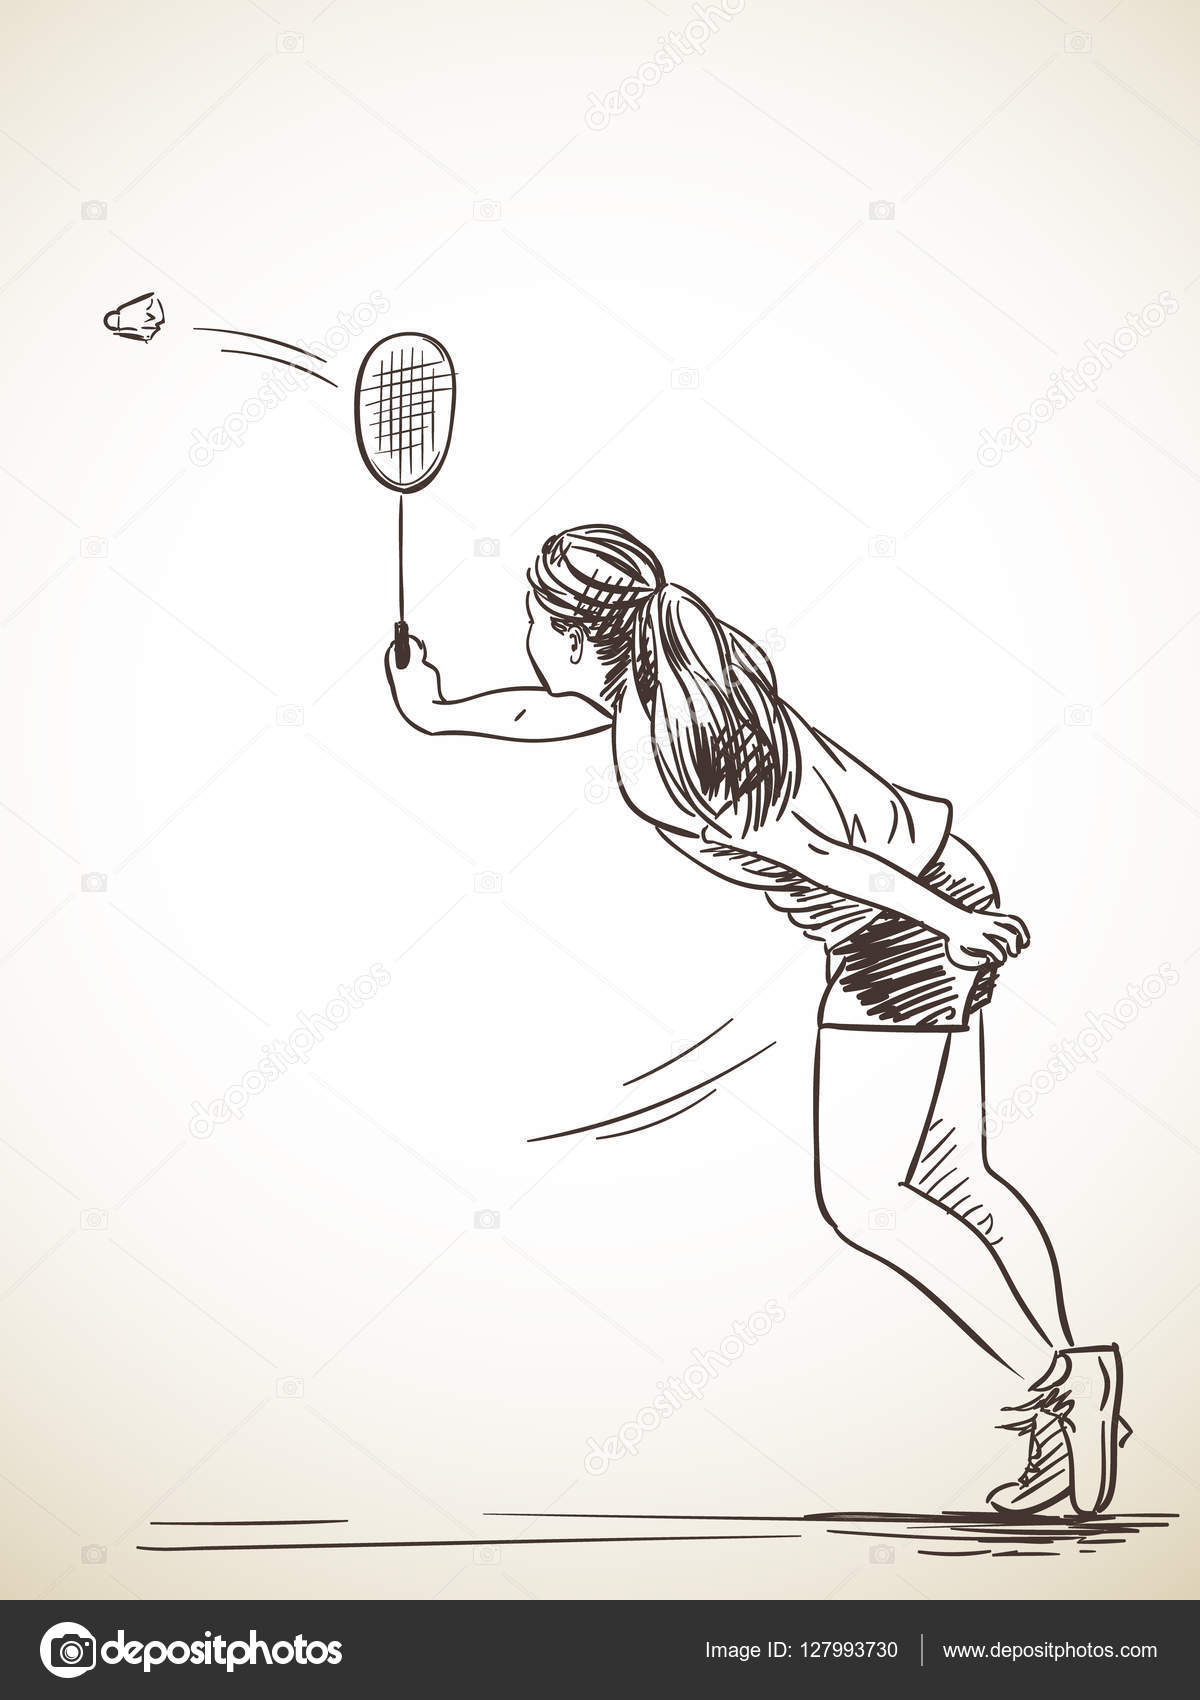 Badminton Outline Drawing Two Rackets Sports Stock Vector (Royalty Free)  1346838728 | Shutterstock